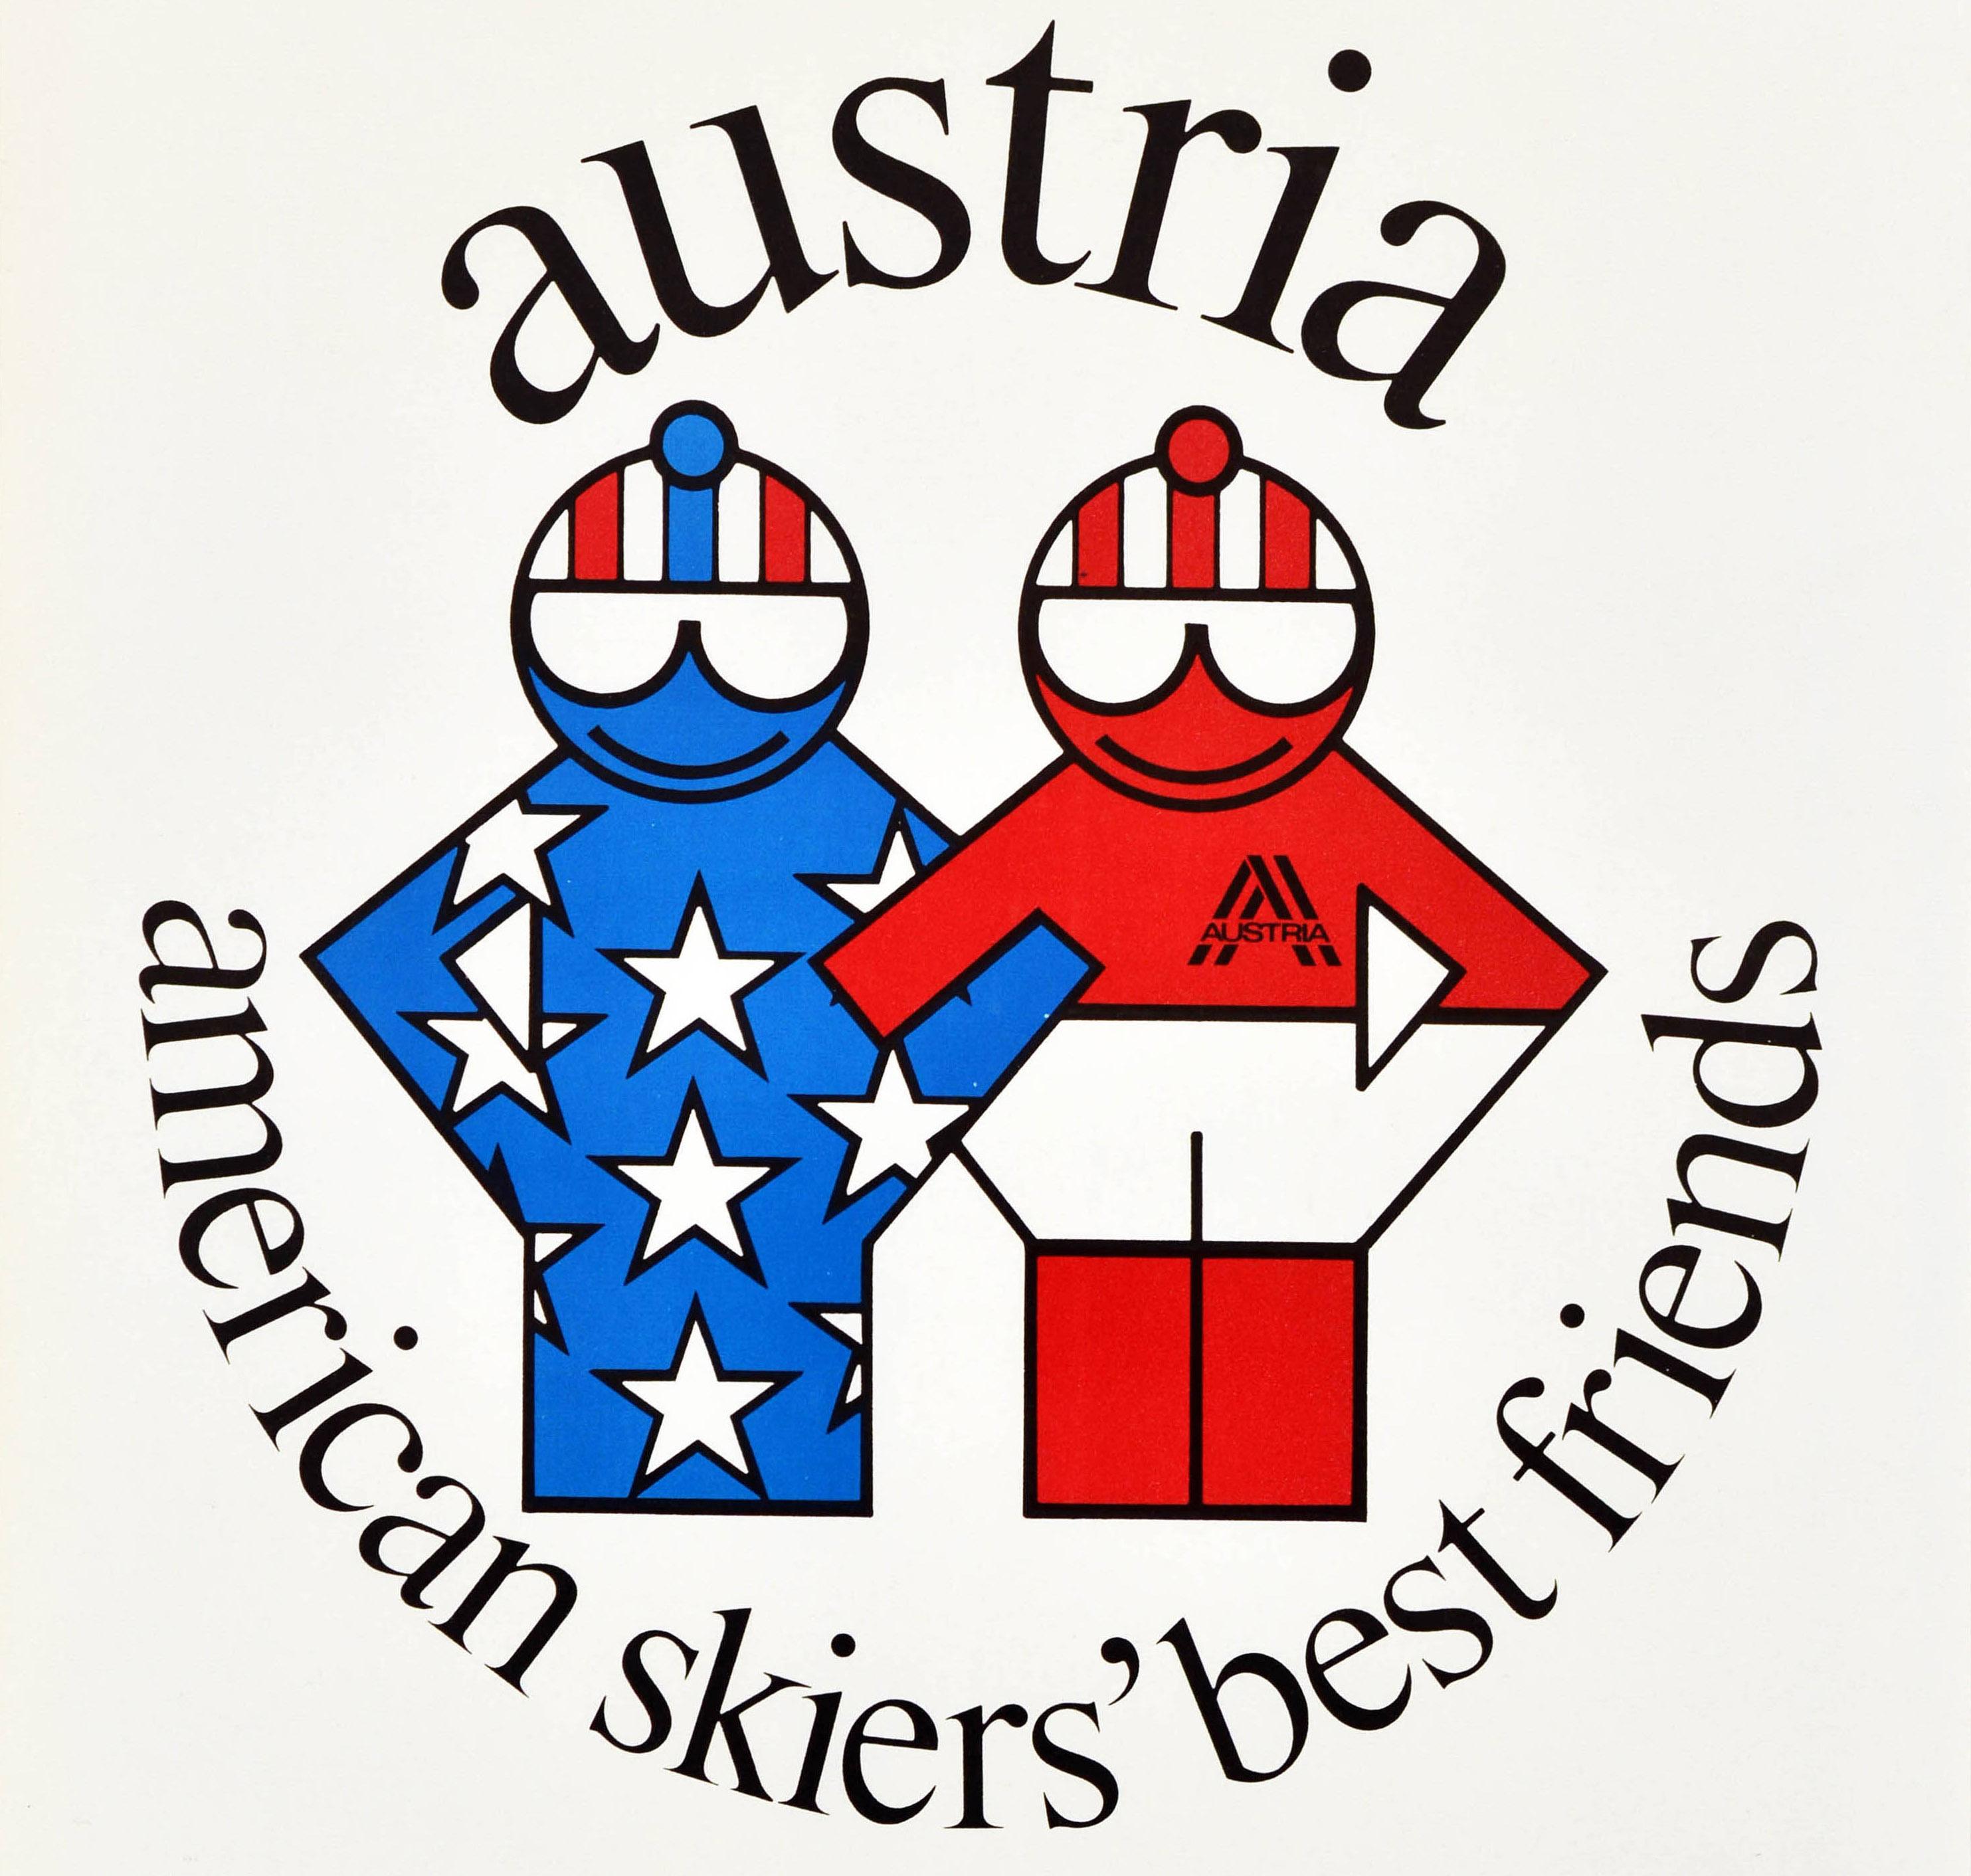 Original vintage winter sport poster for Austria American Skiers' Best Friends featuring a great design depicting two skiers with their arms interlinked, one figure in stars and stripes representing America and the other in red and white stripes as